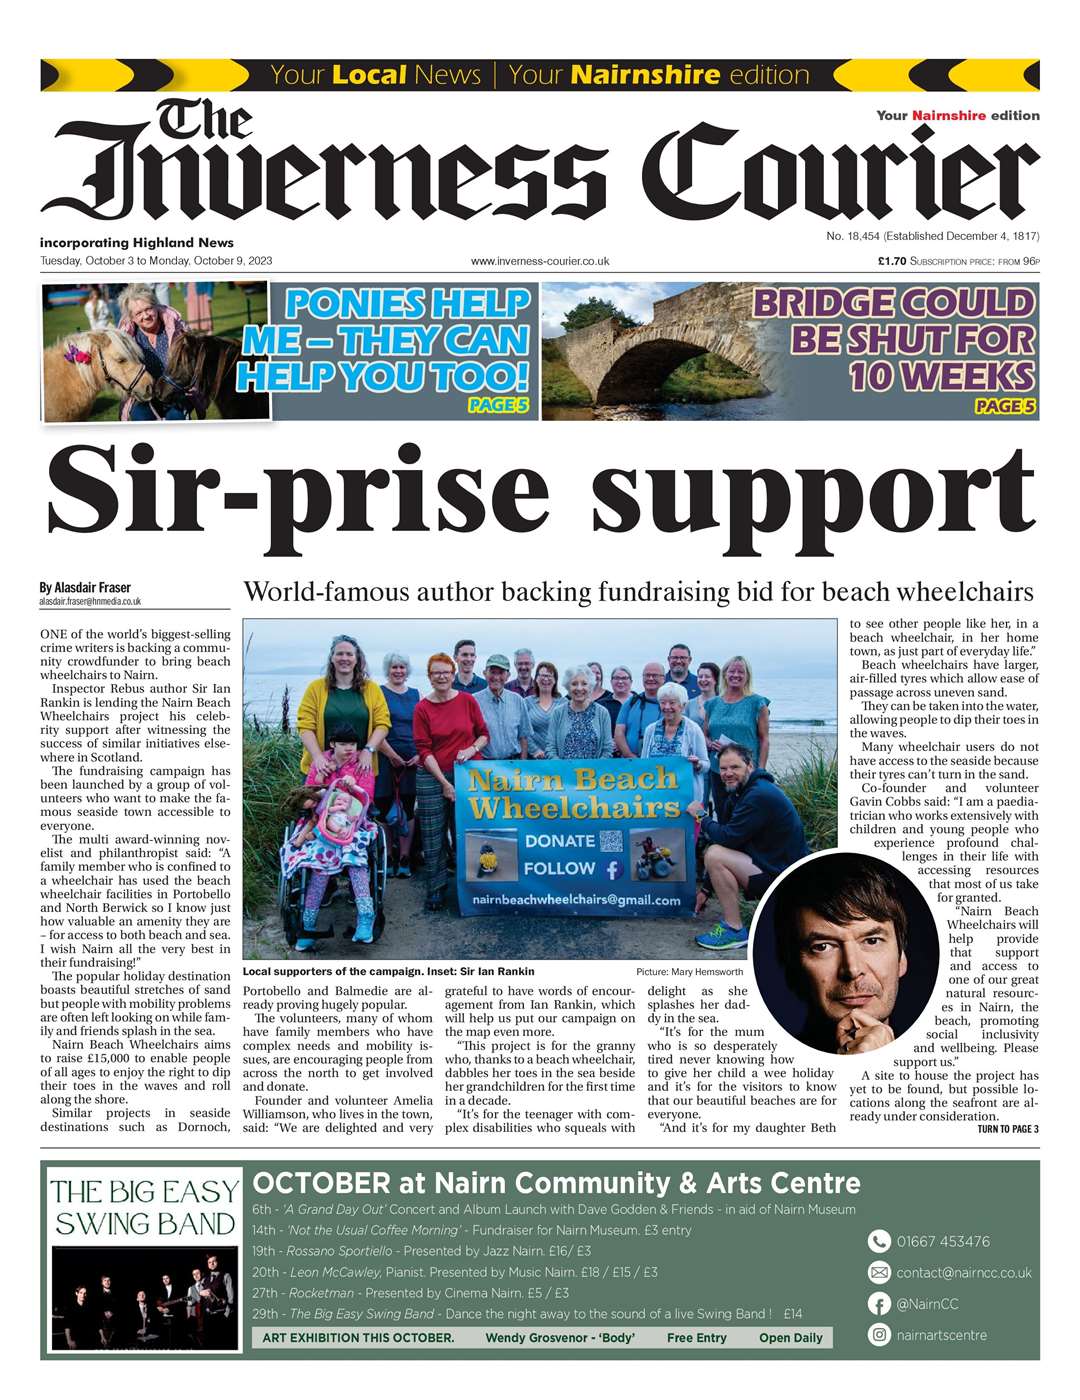 The Inverness Courier (Nairnshire edition), October 3, front page.